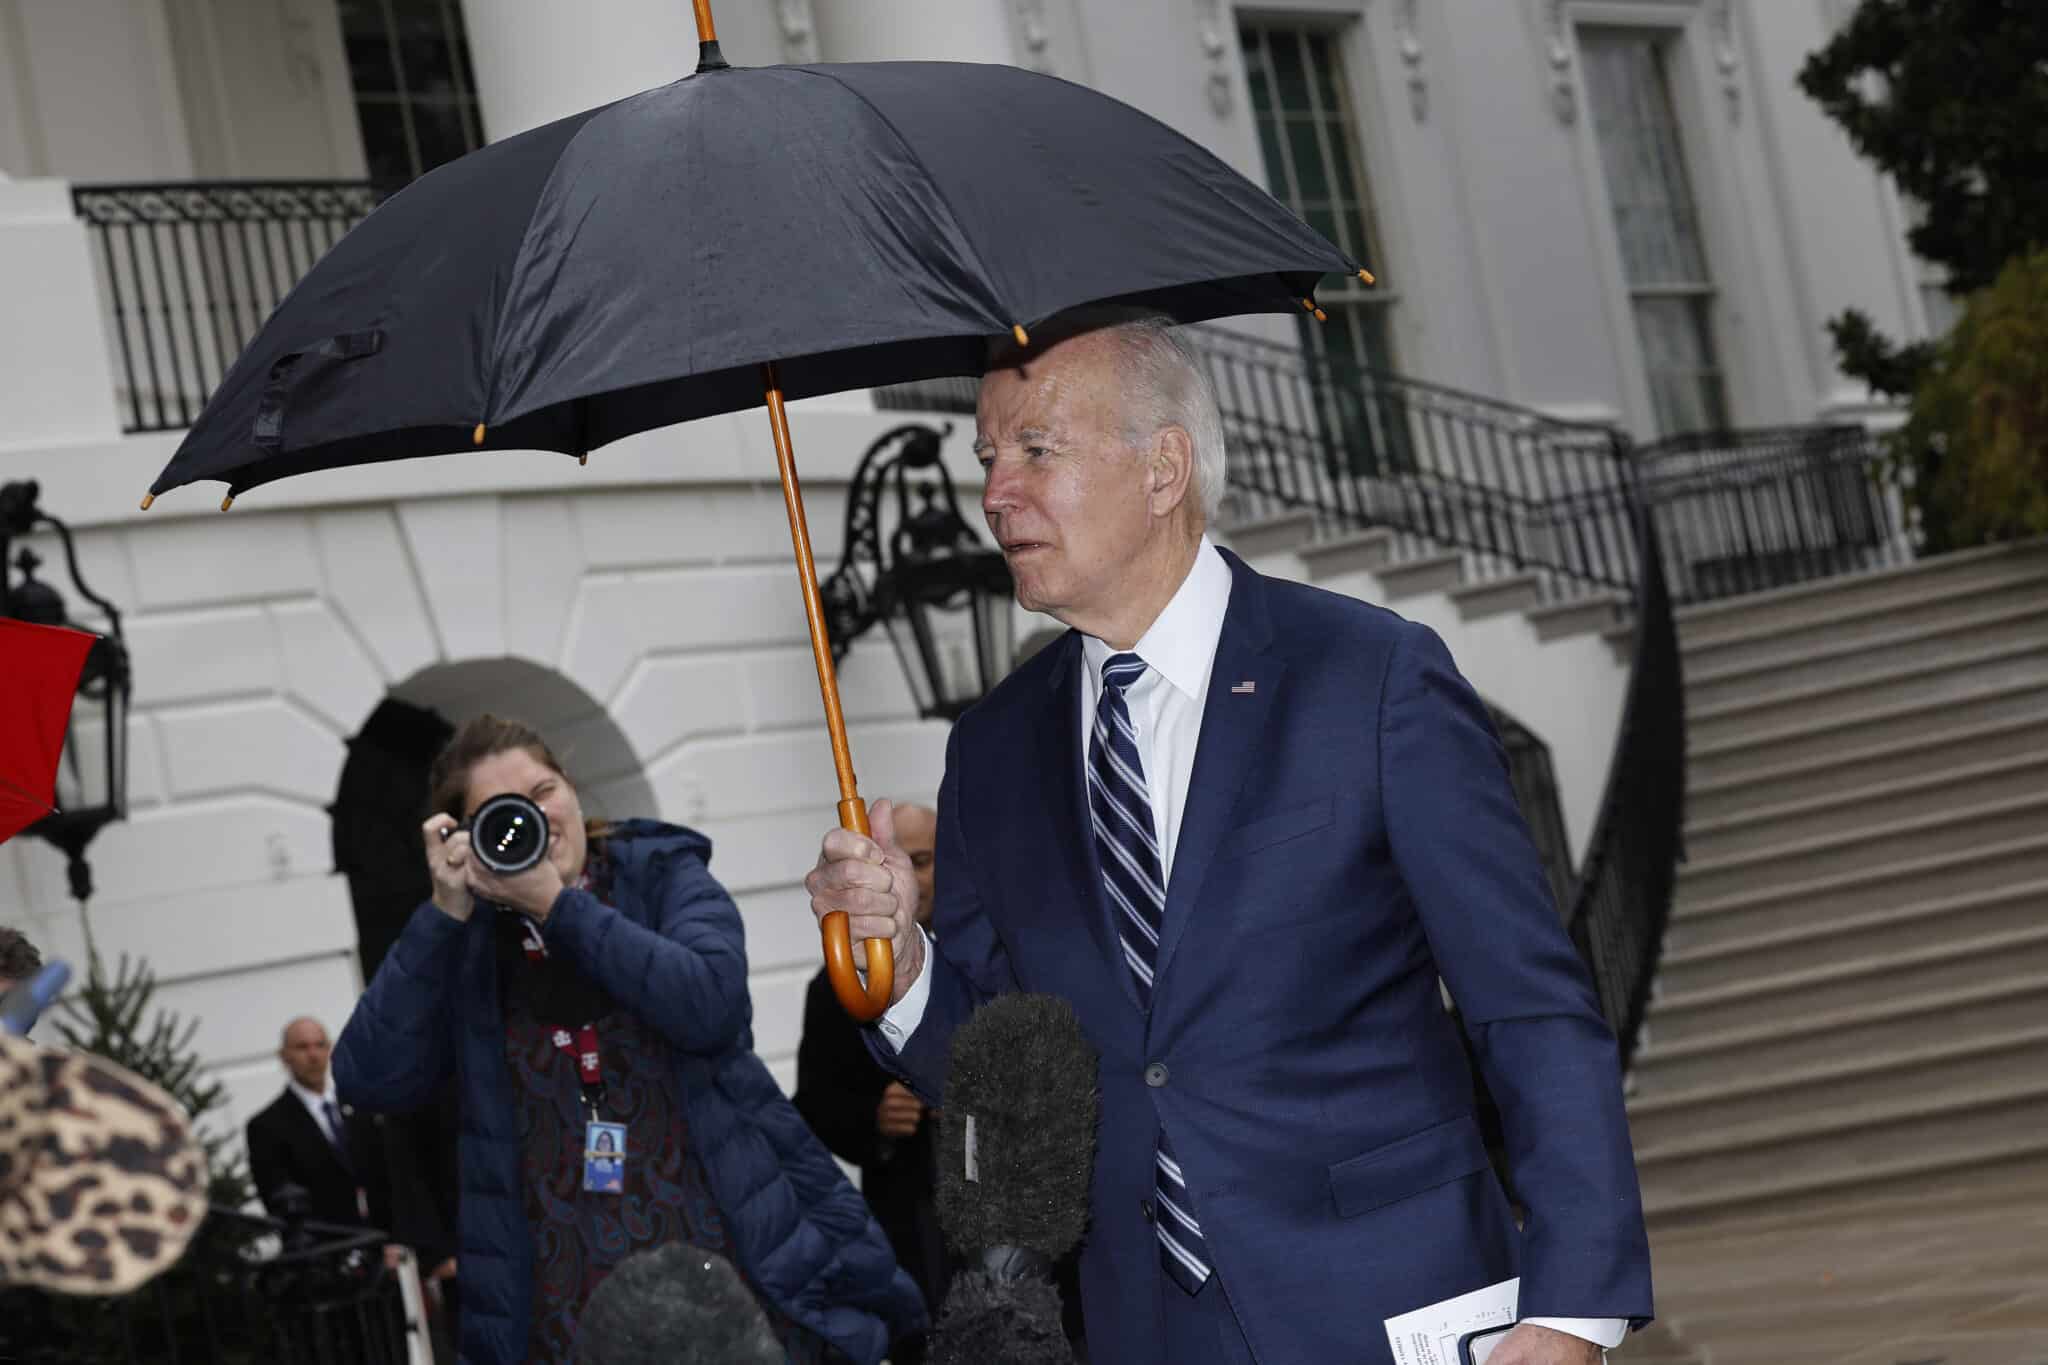 WASHINGTON, DC - DECEMBER 06: U.S. President Joe Biden briefly speaks with reporters in the rain as he departs the White House on December 06, 2022 in Washington, DC. Biden is traveling to Phoenix, Arizona, to tour the Taiwan Semiconductor Manufacturing Company chip-making factory and give a speech about his economic plan. (Photo by Chip Somodevilla/Getty Images)